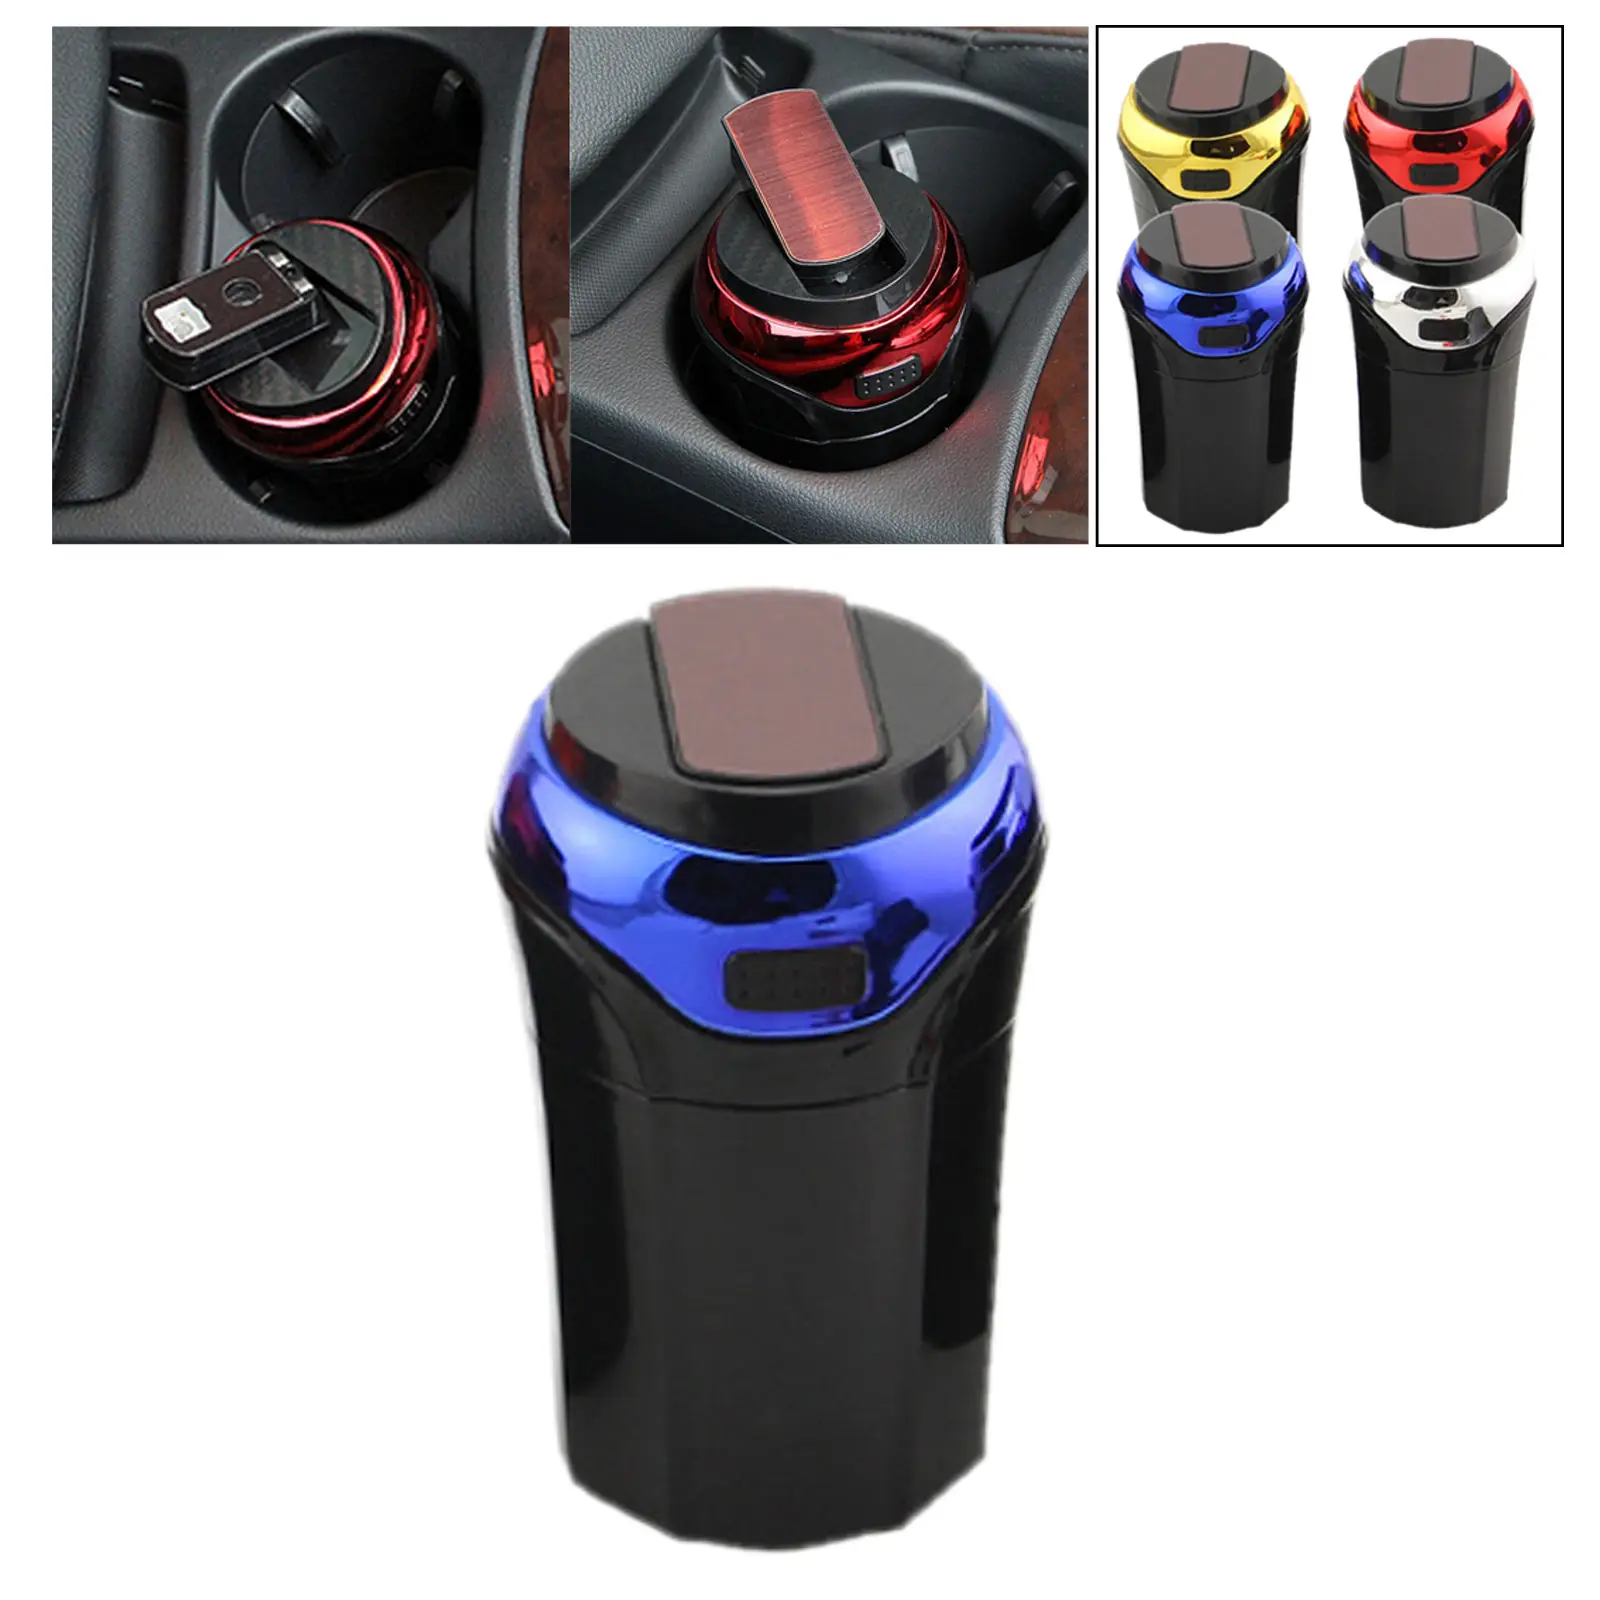 1PCS Portable Car Ashtray Storage Cup Container Cigar Ash Cup Holder with Lid Black Car Styling Universal